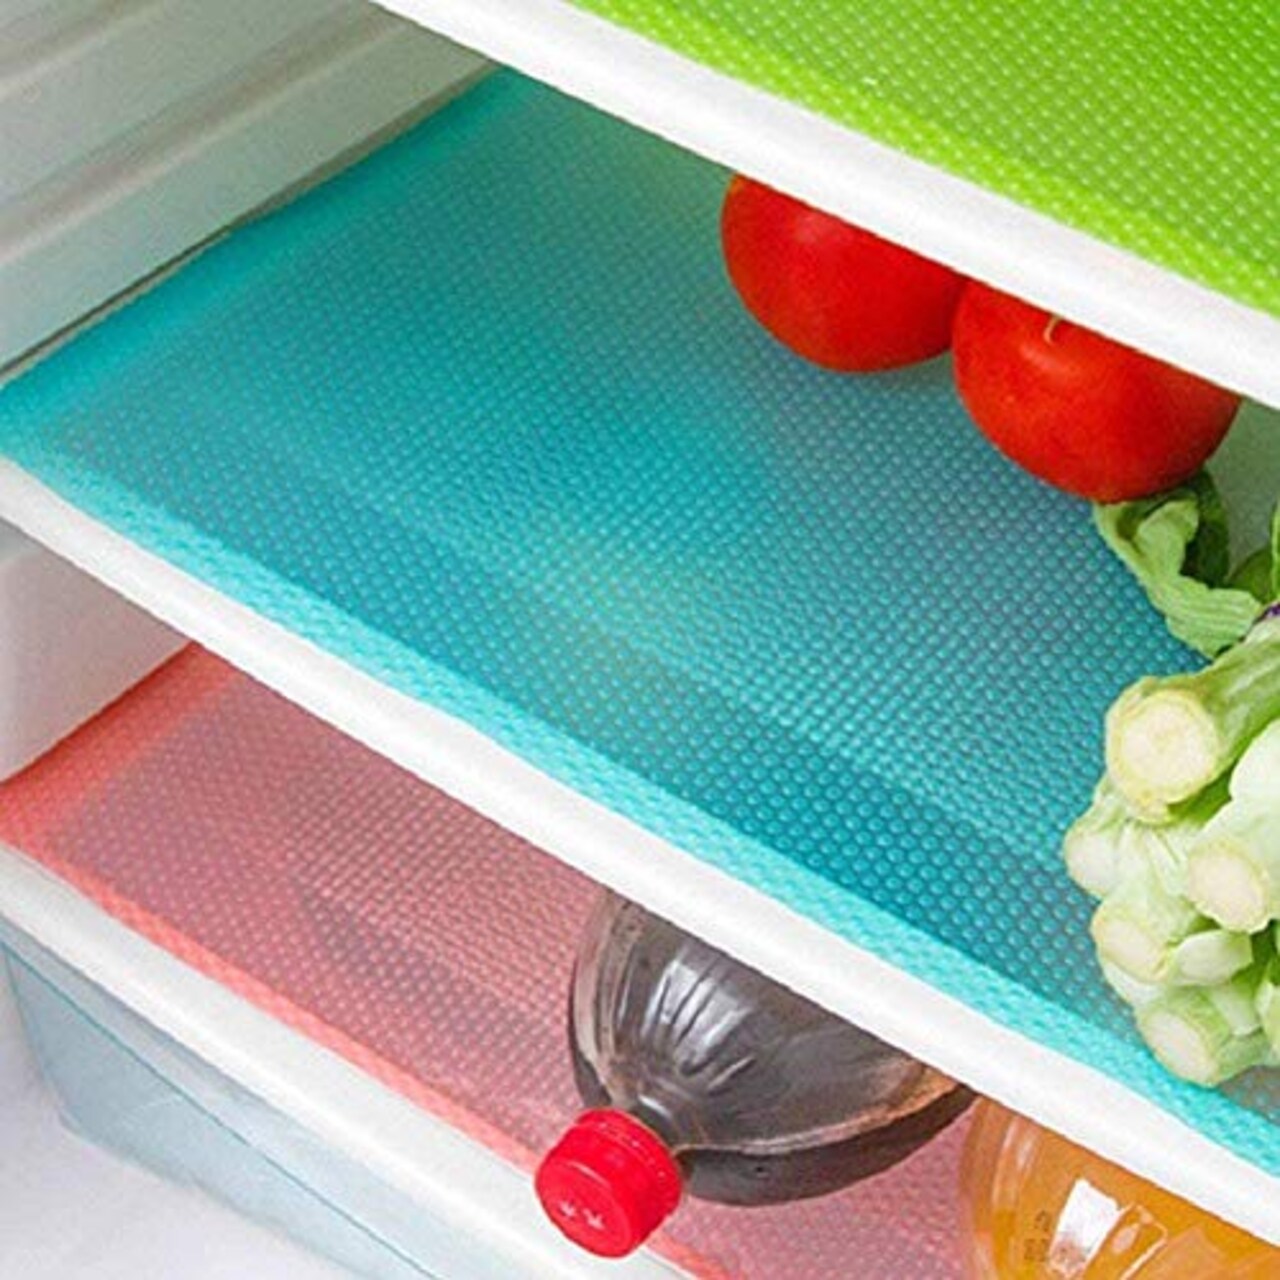 AKINLY 9 Pack Washable Fridge Mats Liners Waterproof Fridge Pads Drawer  Table Mats Refrigerator Liners for Shelves,3Red/3Green/3Blue